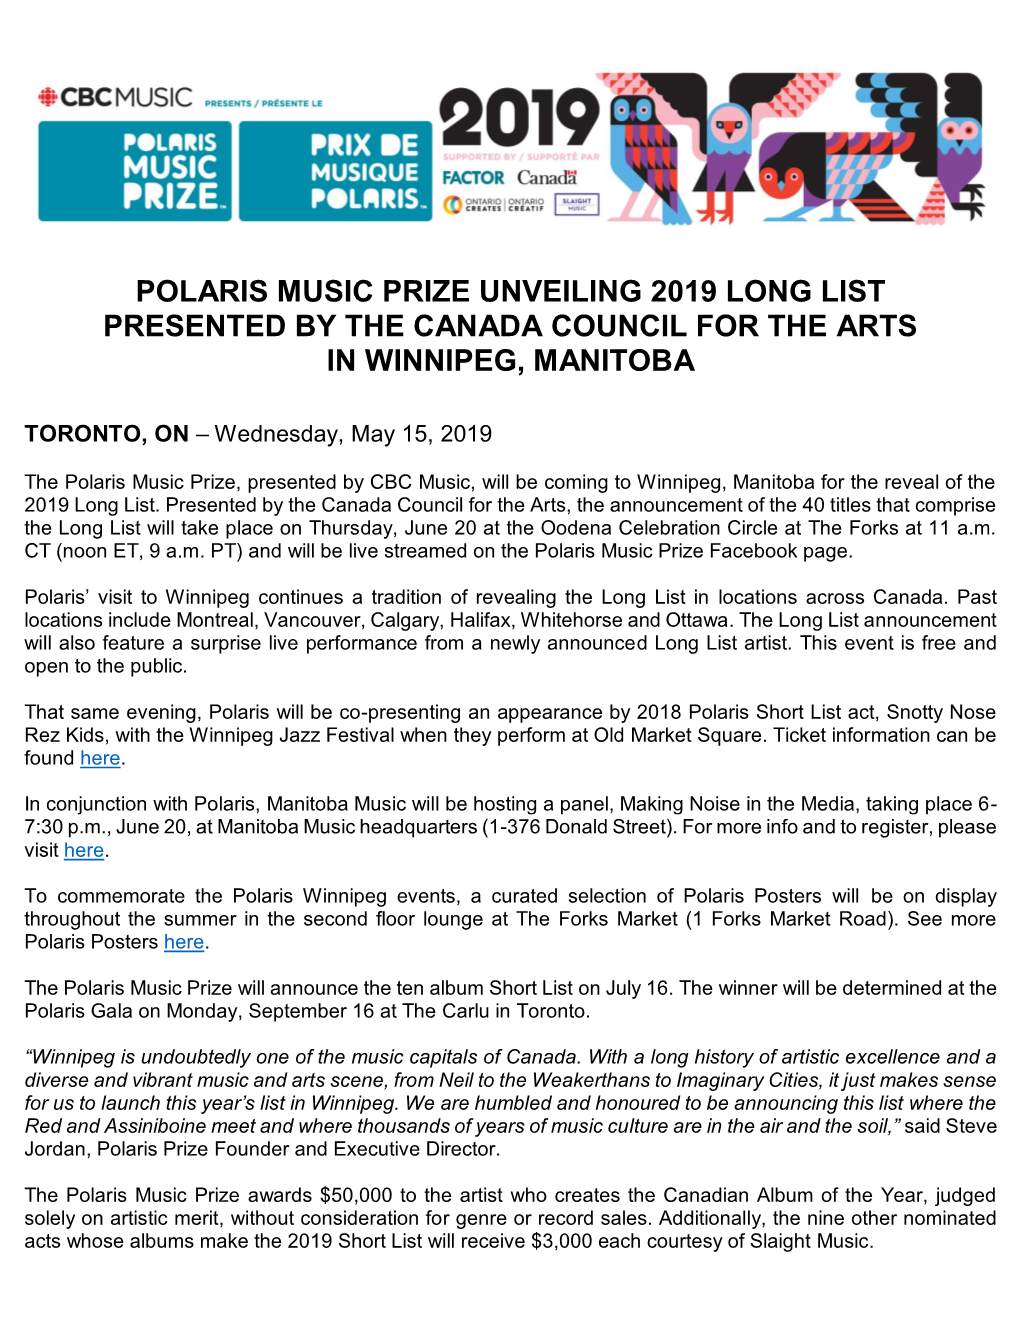 Polaris Music Prize Unveiling 2019 Long List Presented by the Canada Council for the Arts in Winnipeg, Manitoba